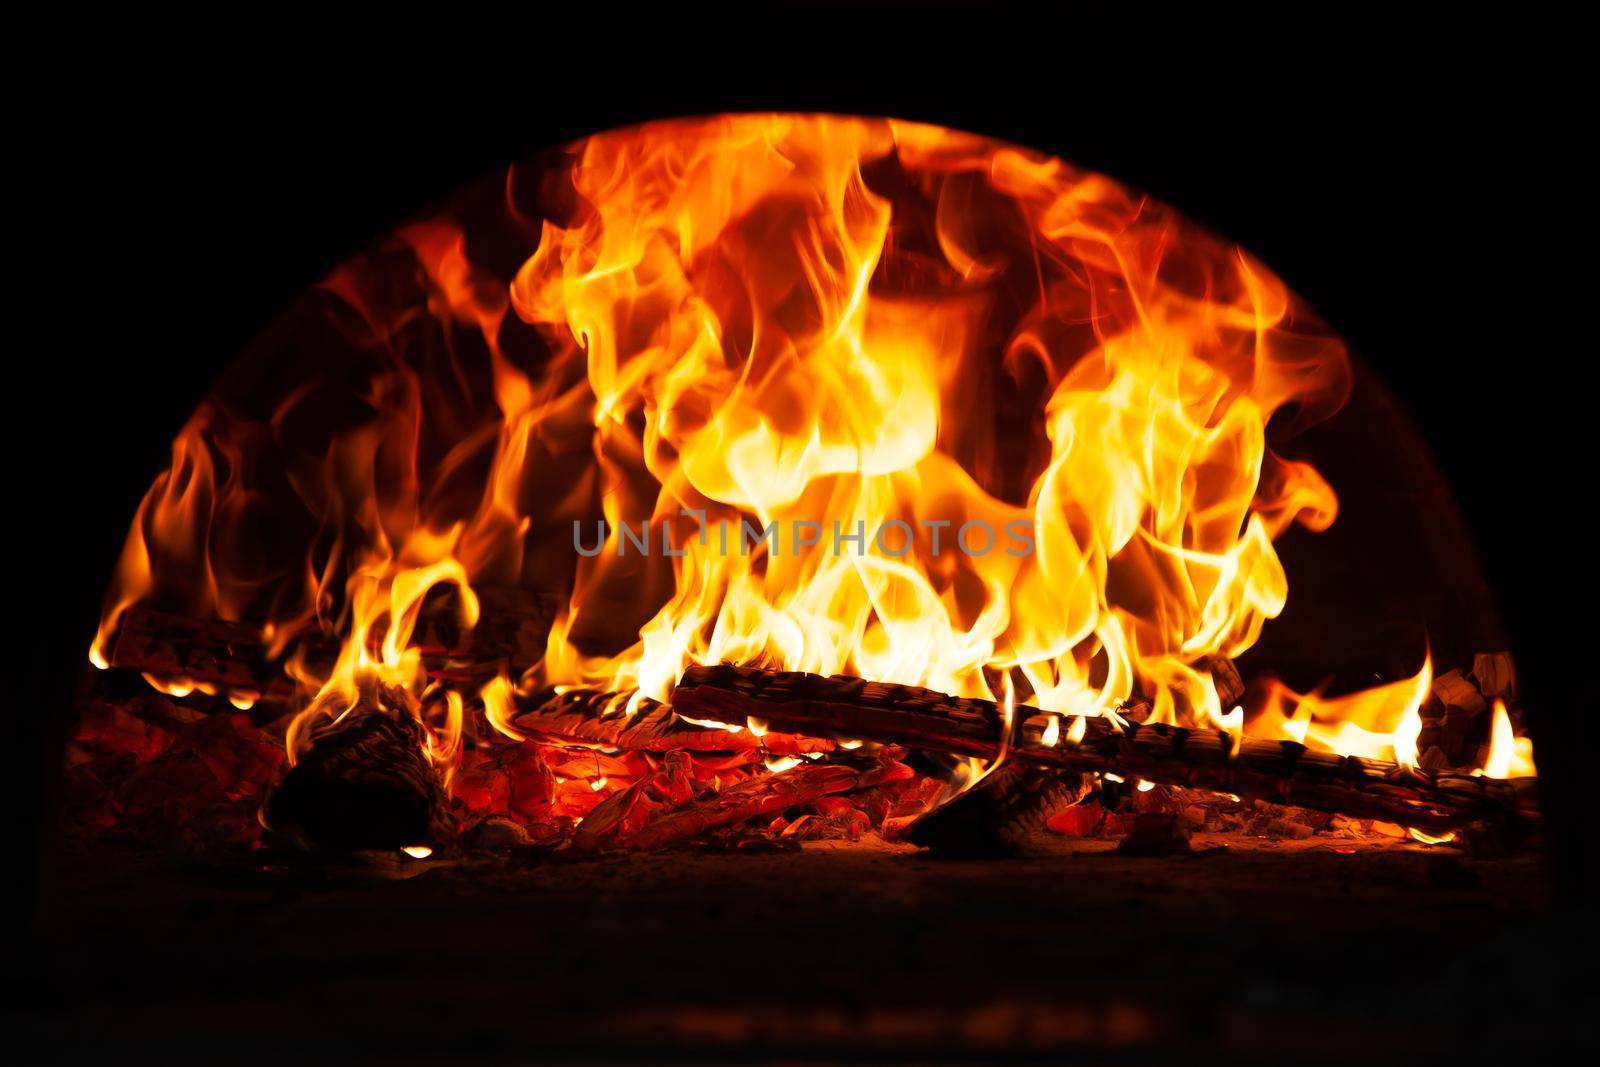 Hot flame of fire in oven. Warm evening by the fireplace. by StudioPeace